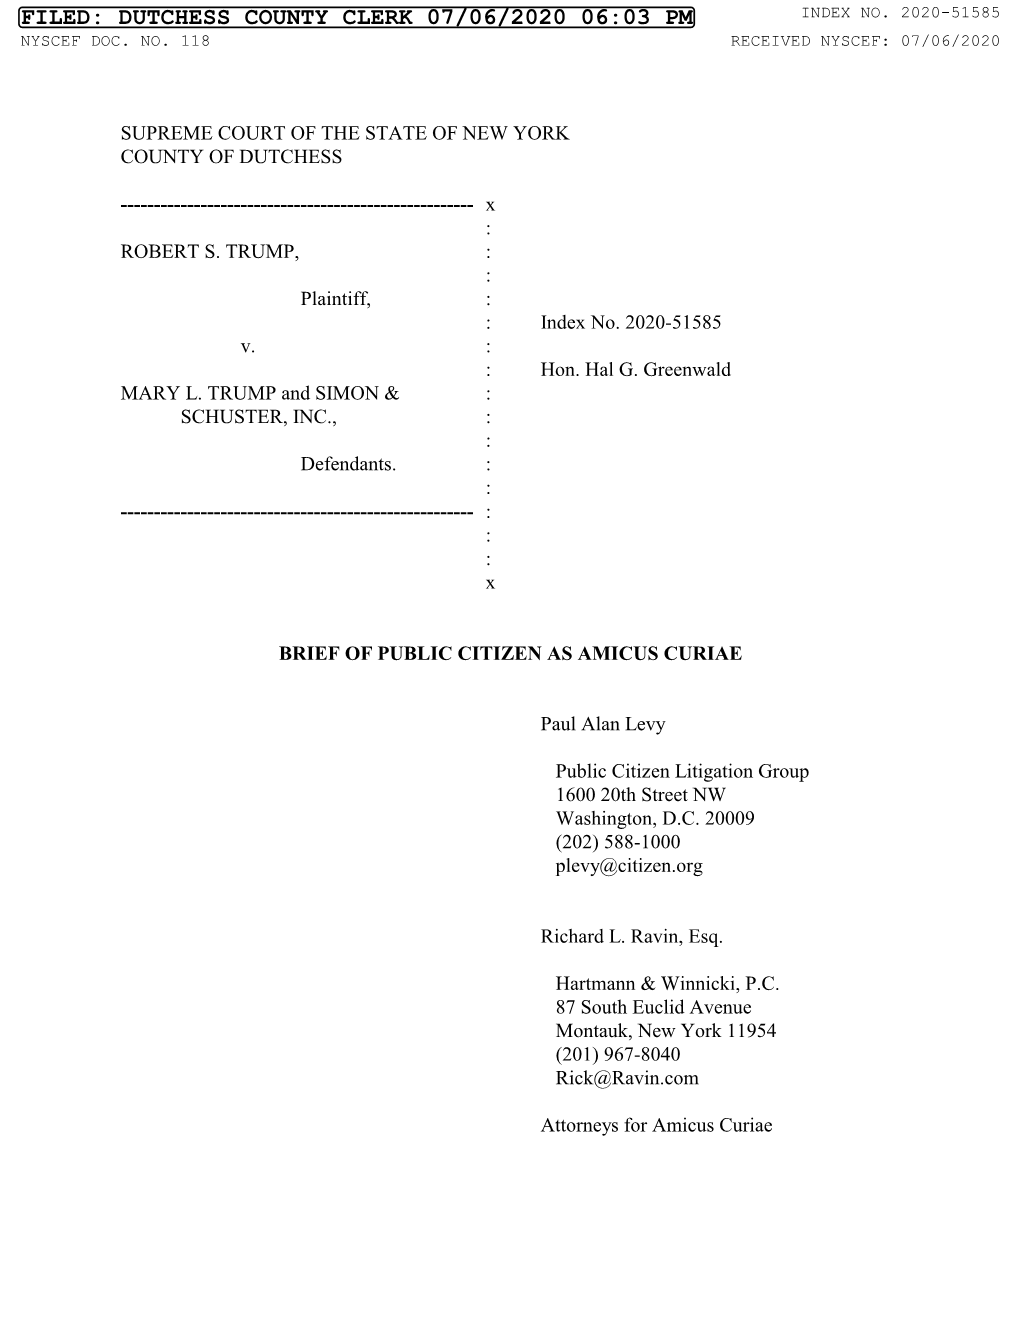 Amicus Brief of the Reporters Committee for Freedom of the Press Persuasively